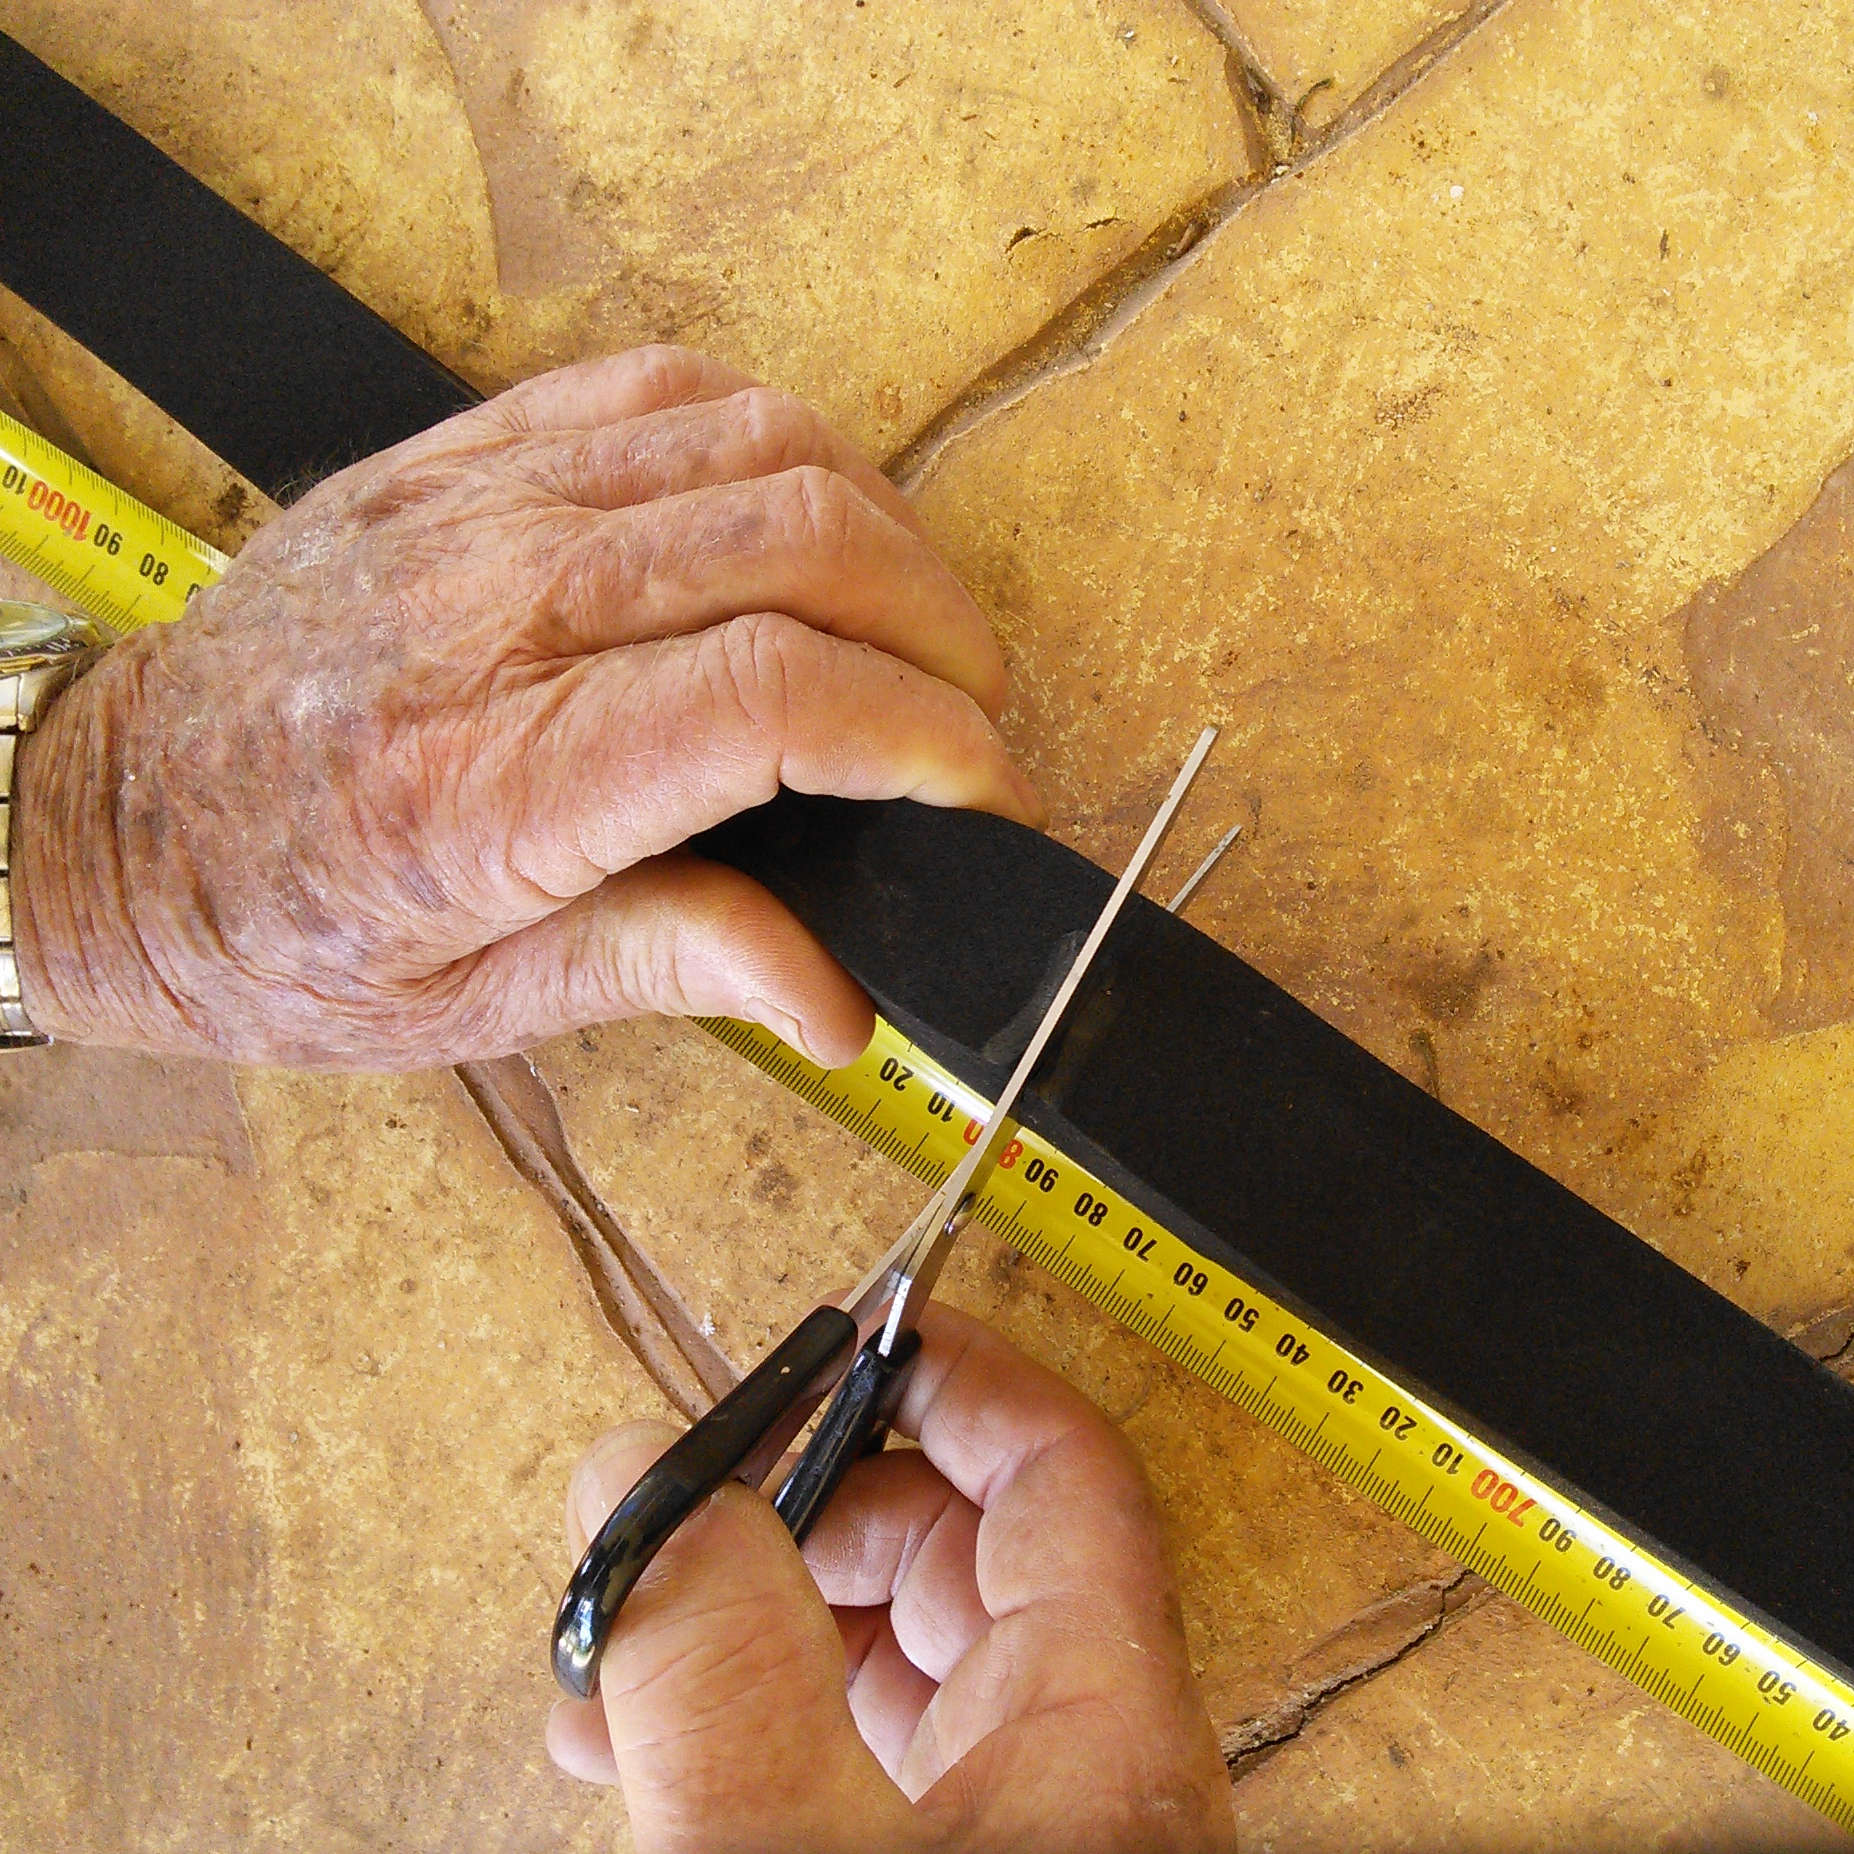 Cutting Adhesive Neoprene Foam Tape with normal household scissors